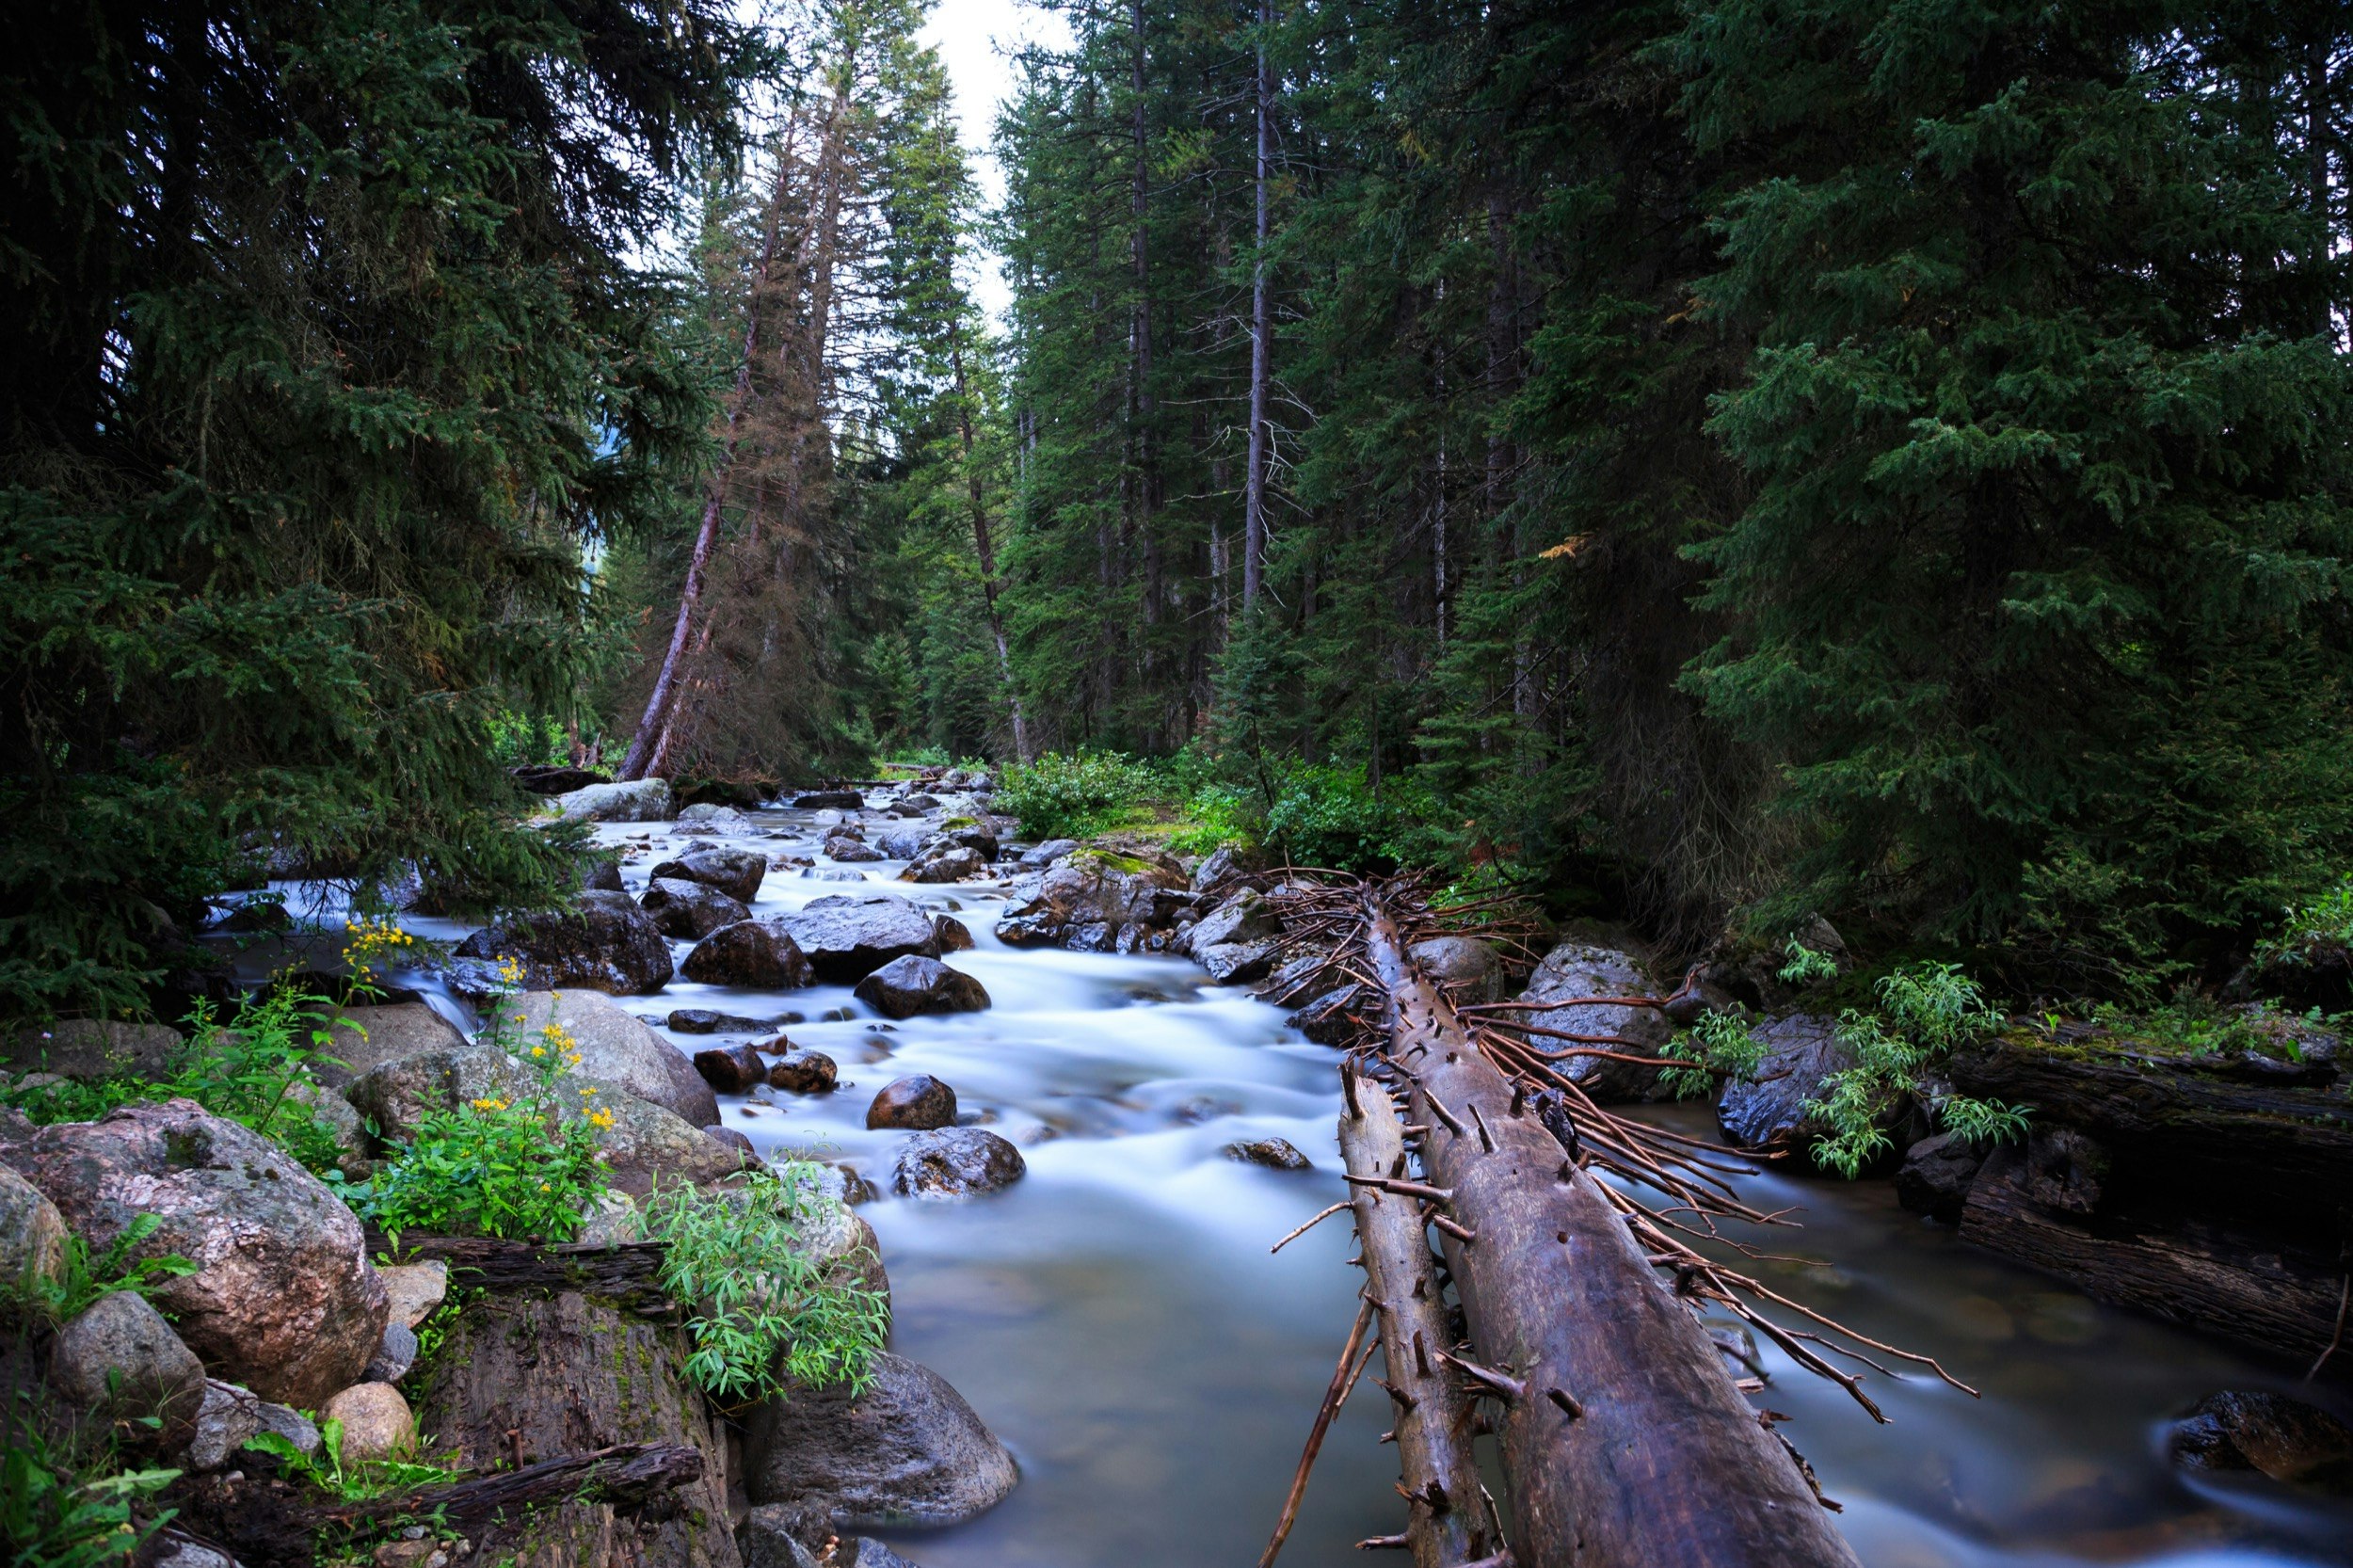 Fallen trees stretch across a gently tumbling river in a forest near Portland Oregon marked by rain and wildflowers